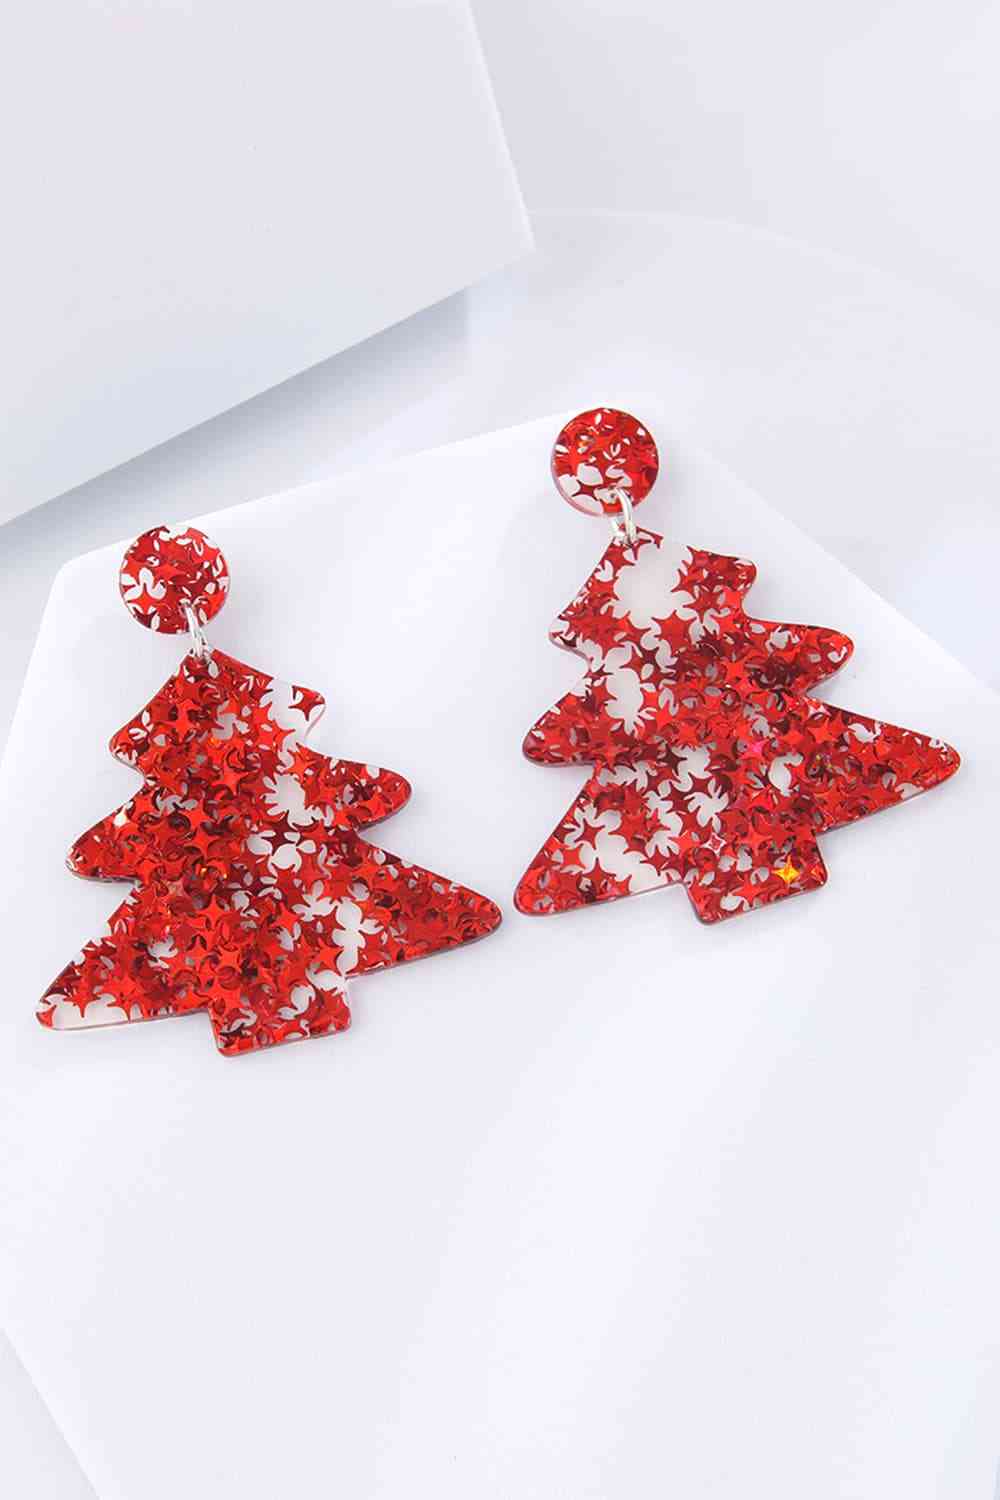 Christmas Tree Acrylic Earrings - Kawaii Stop - Acrylic Jewelry, Christmas, Christmas Spirit, Christmas Tree Earrings, Earrings, Fashionable, Festive Accessories, Festive Fashion, Festive Jewelry, Holiday Fashion, Holiday Glam, Holiday Wardrobe, Party Accessories, Seasonal Style, Ship From Overseas, Sparkling Jewelry, Stylish Earrings, Trendy Accessories, Unique Design, Winter Accessories, Y.Q@Jew